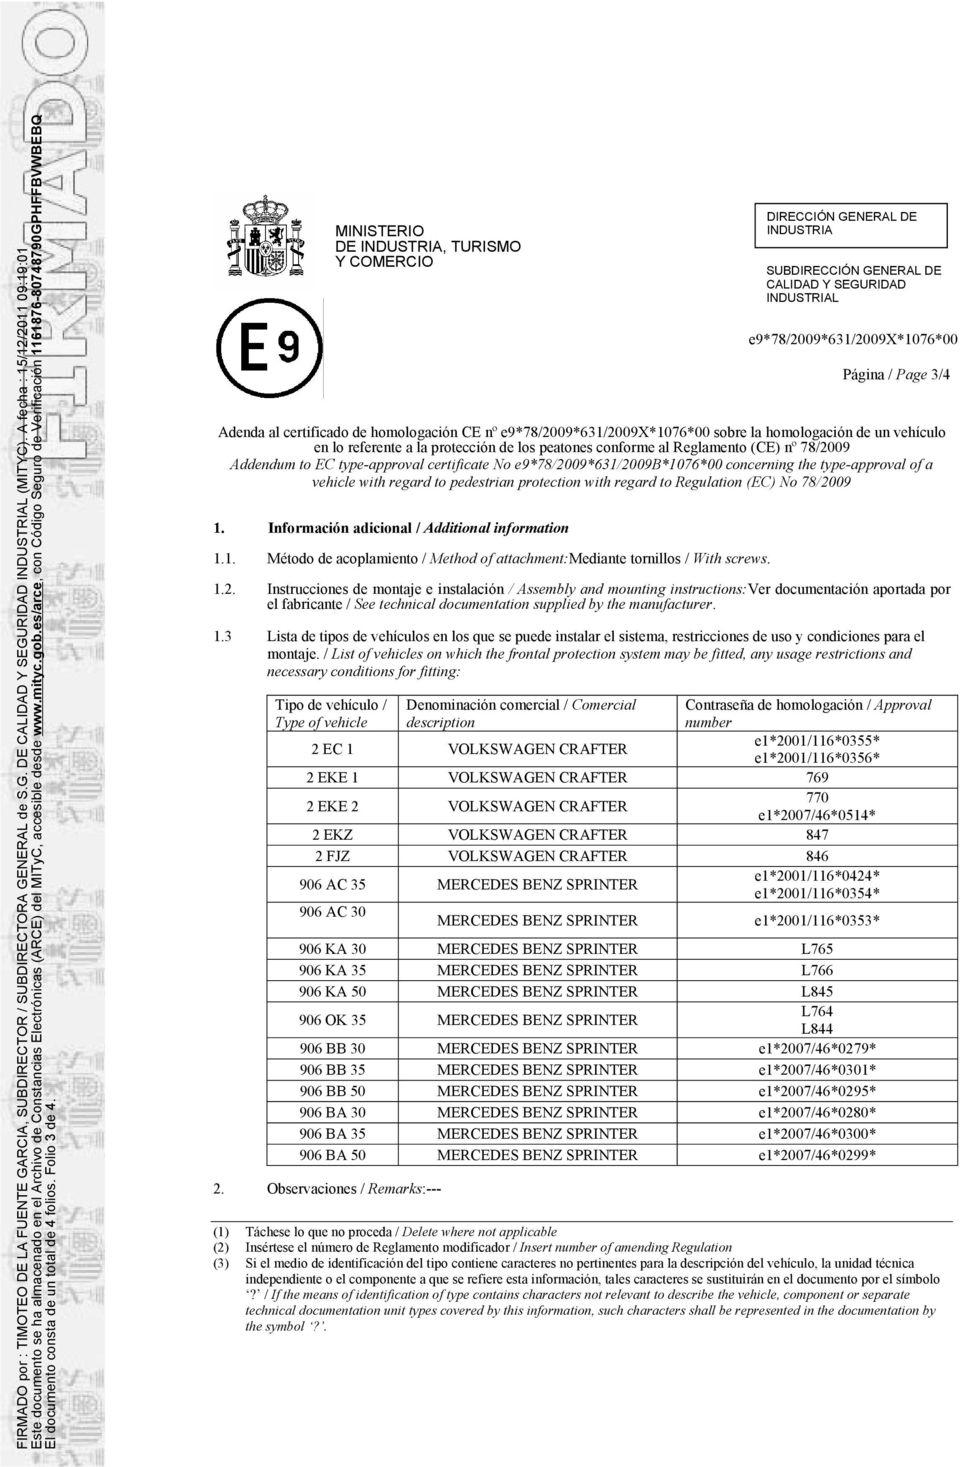 Addendum to EC type-approval certificate No e9*78/2009*631/2009b*1076*00 concerning the type-approval of a vehicle with regard to pedestrian protection with regard to Regulation (EC) No 78/2009 1.